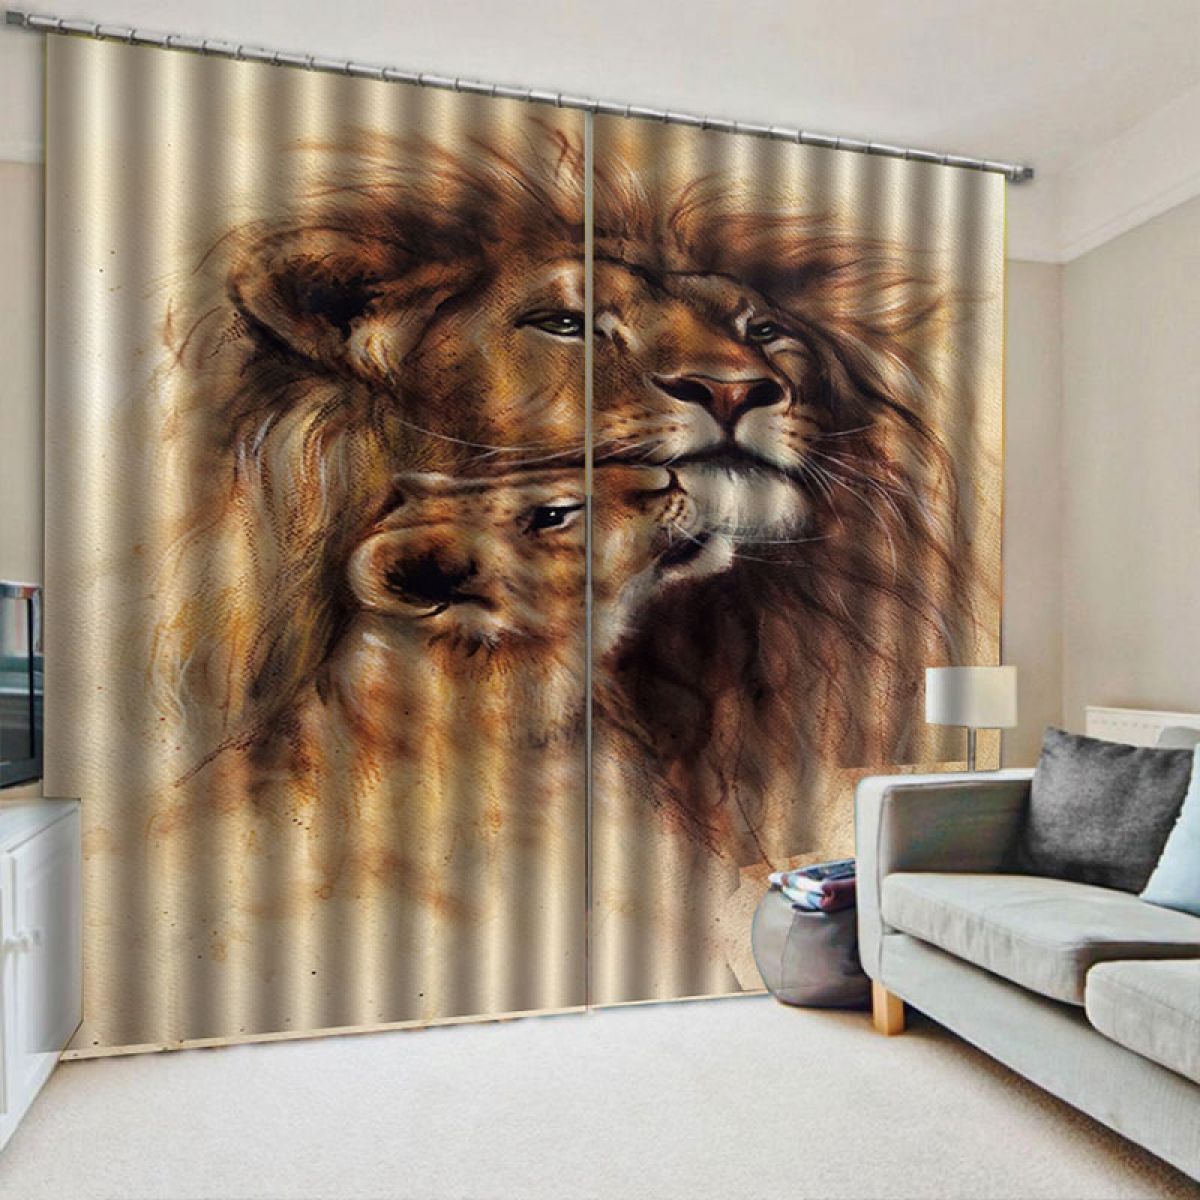 Mother Lion And Child Printed Window Curtain Home Decor